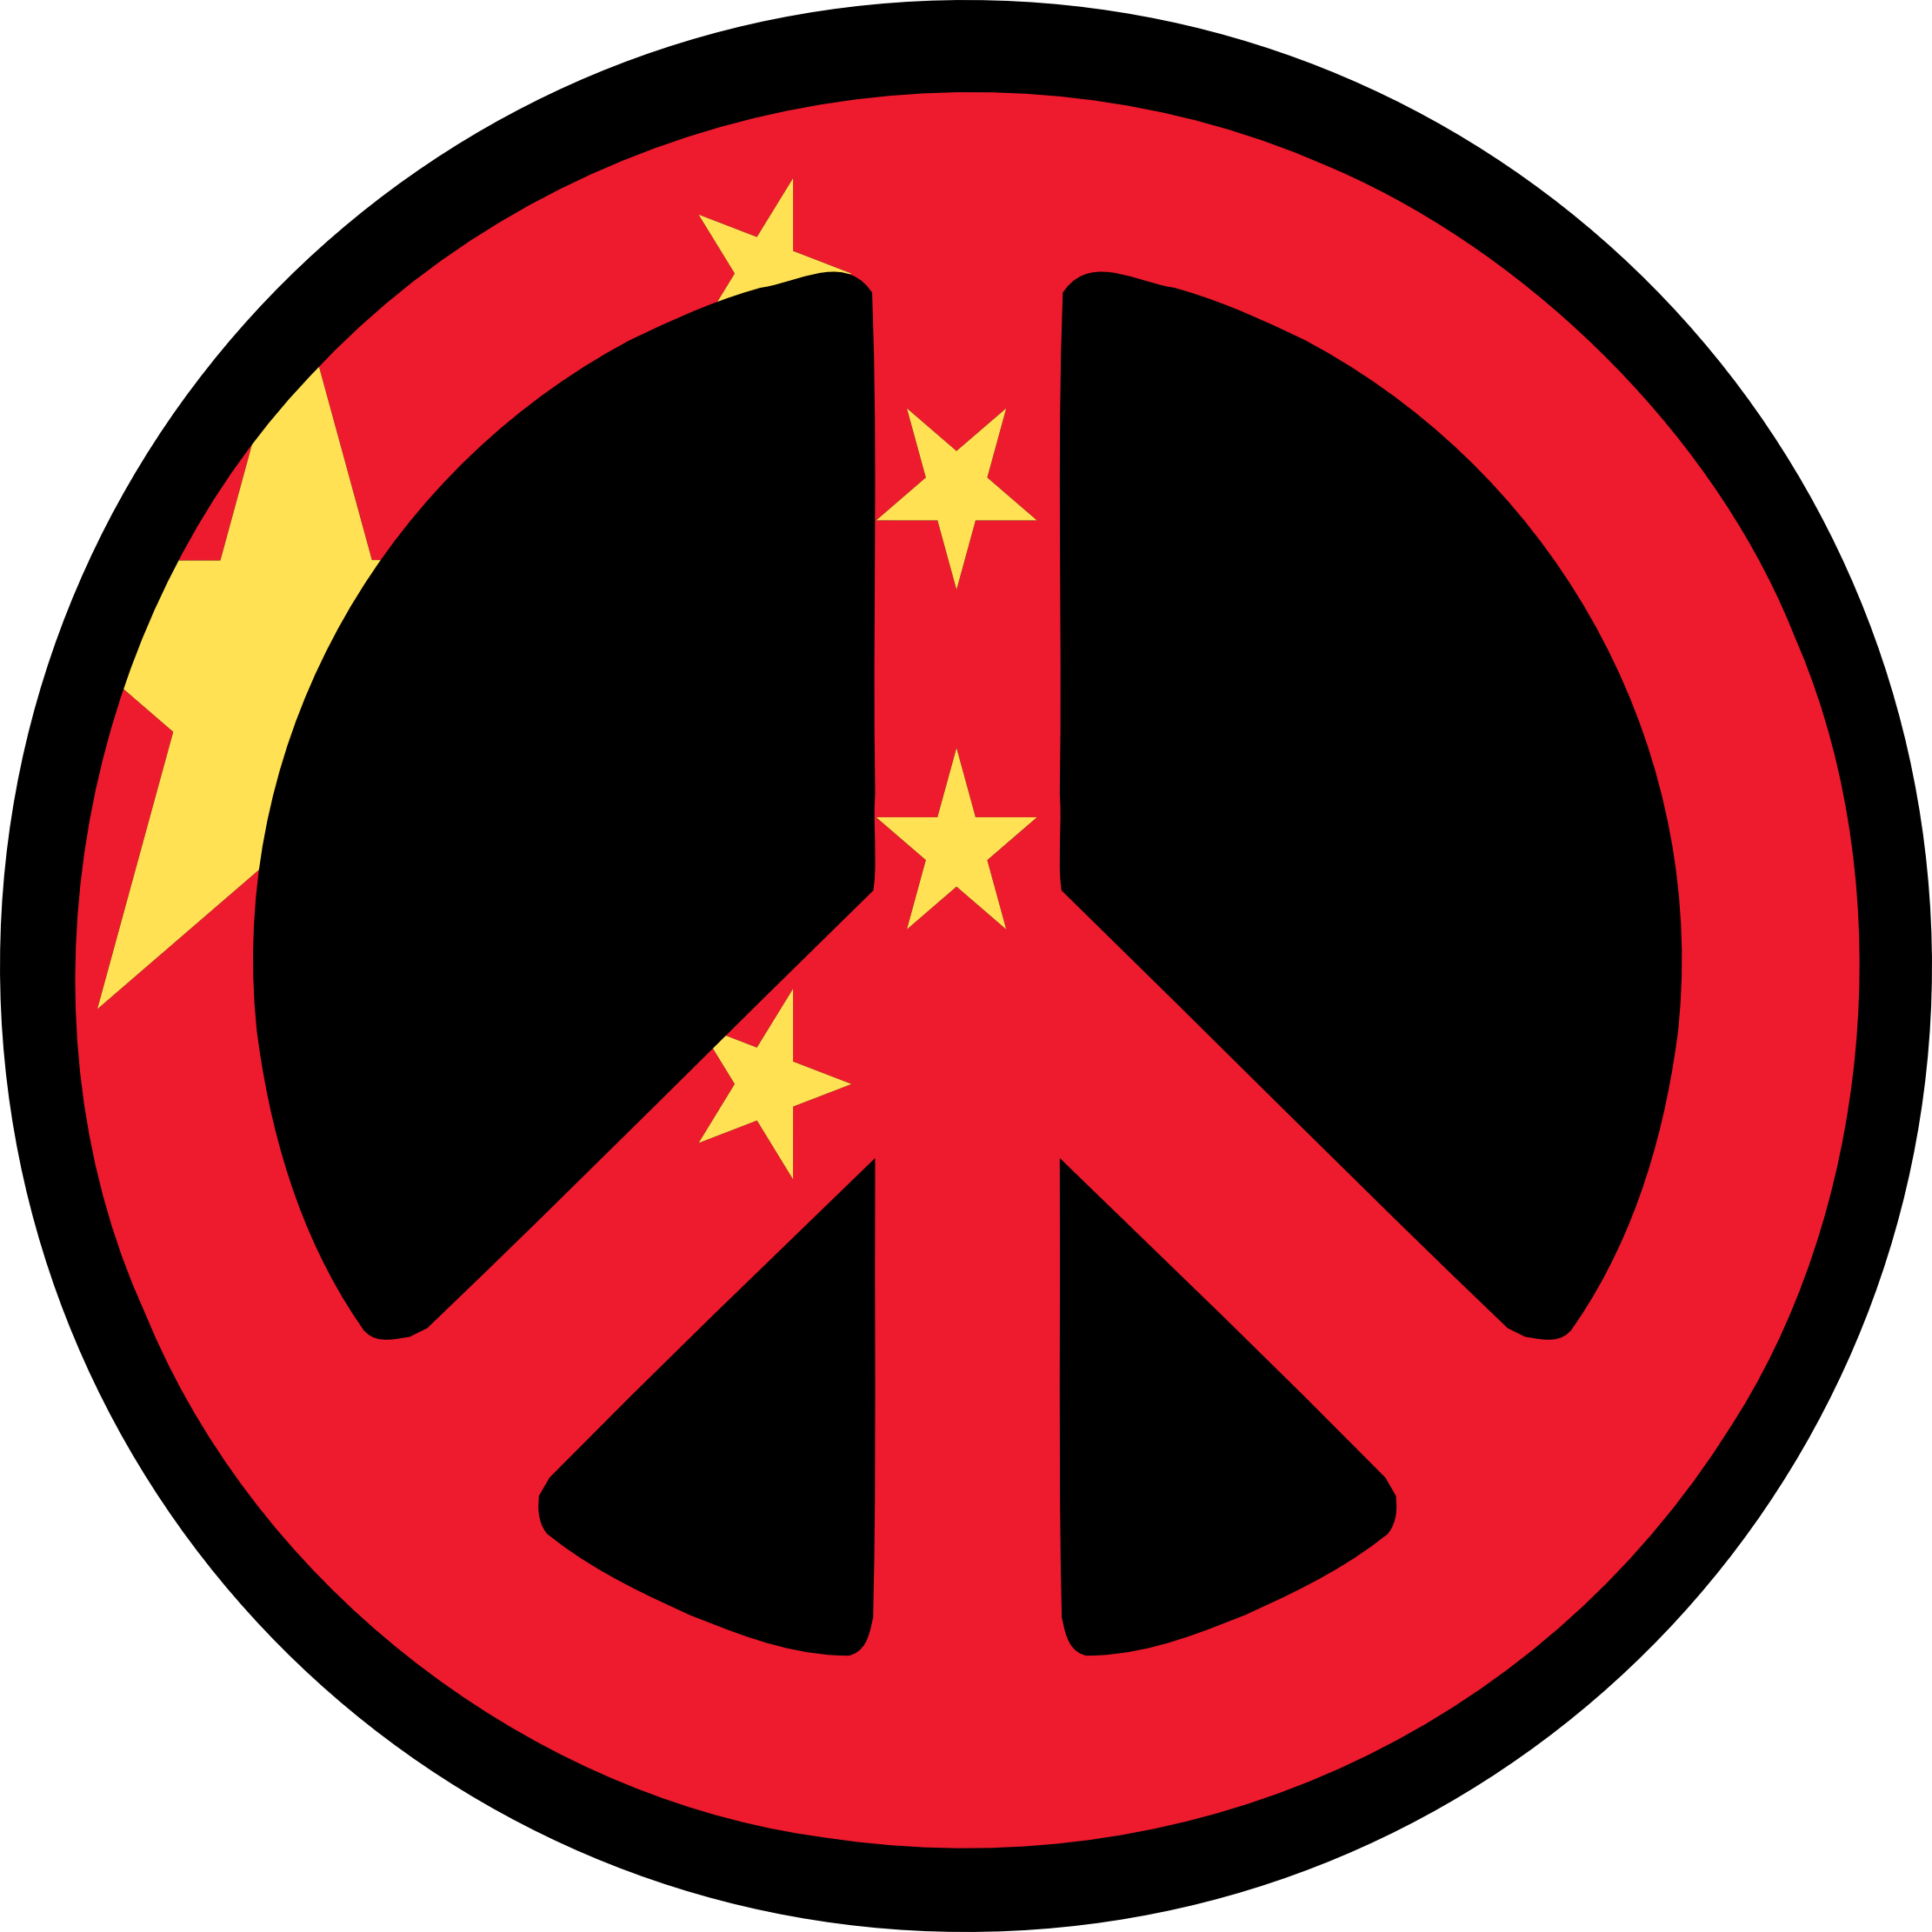 SVG China Flag Peace Sign peacesymbol.org SVG Flagartist.